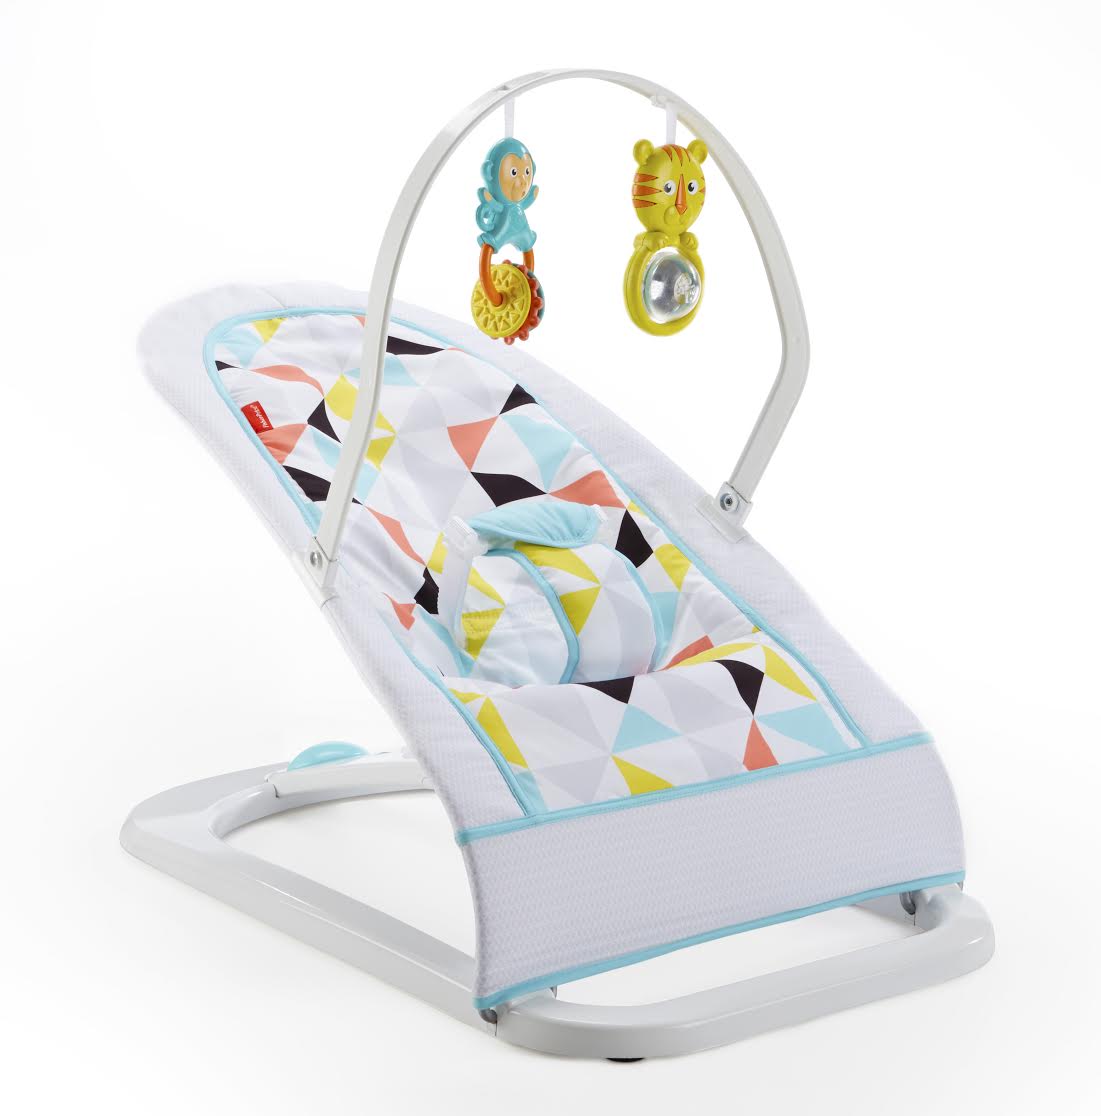 Jonathan Adler for Fisher Price: A new line of modern gorgeous baby gear coming in the fall!